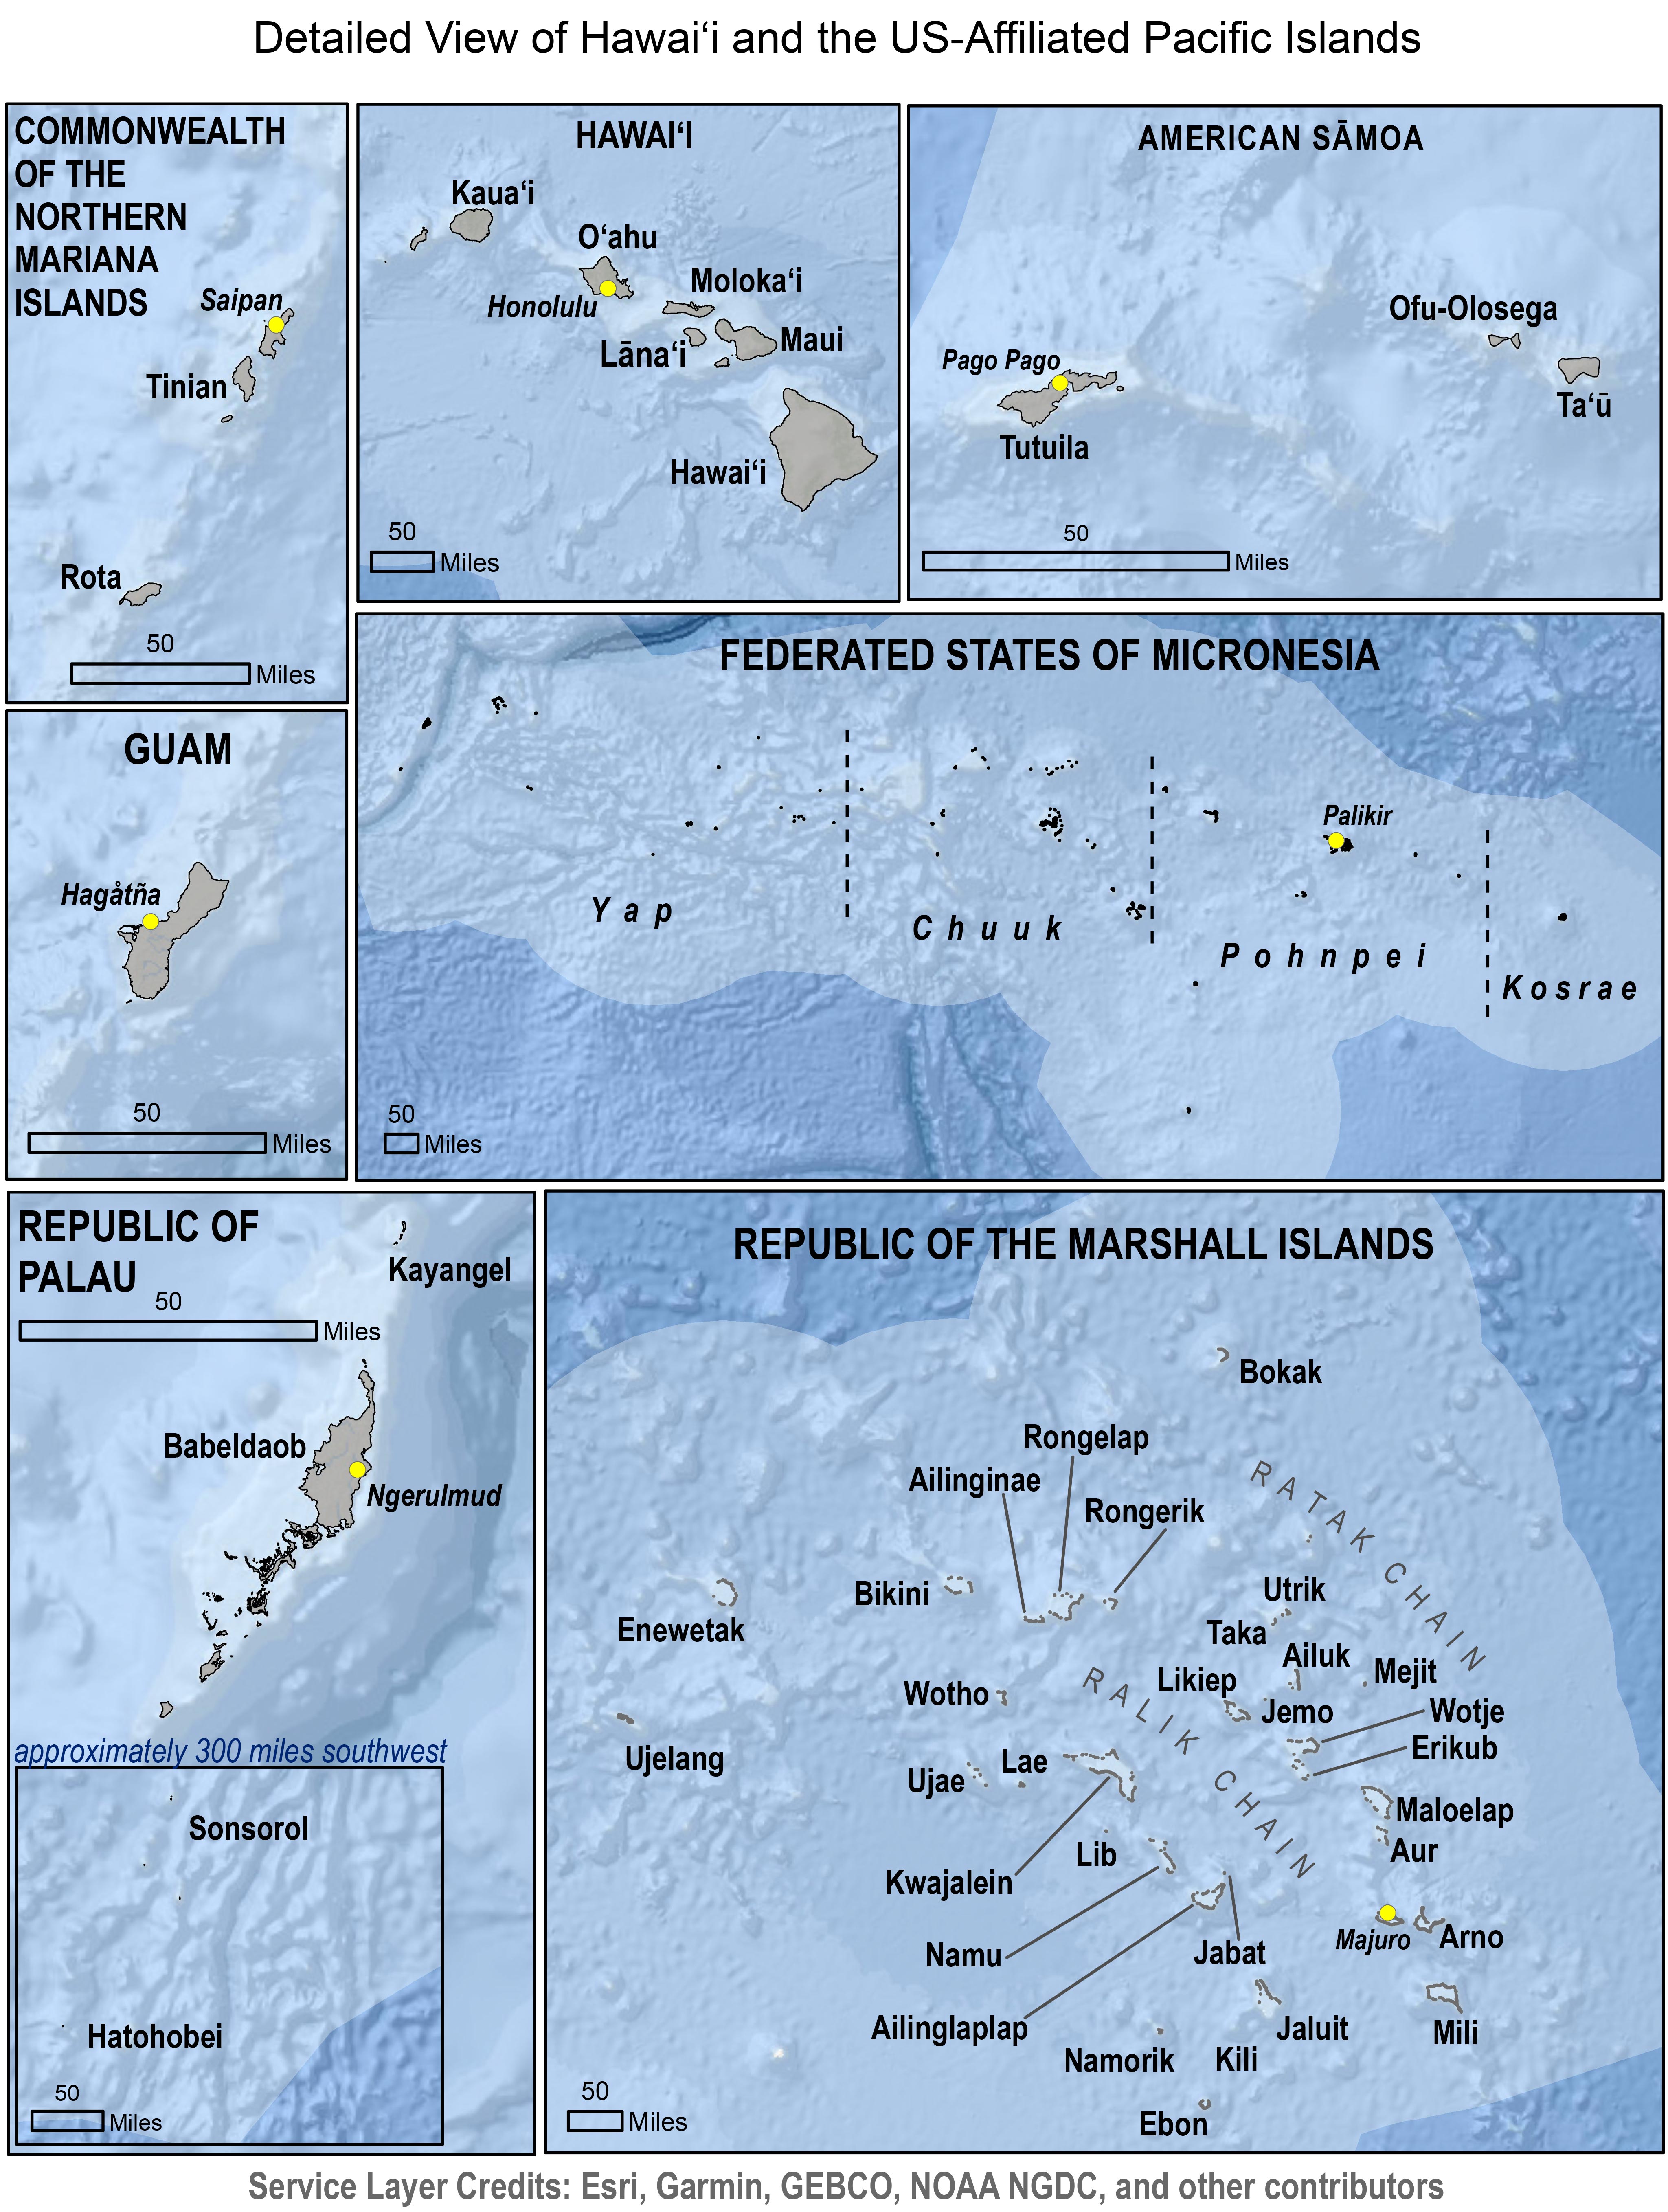 Detailed View of Hawaiʻi and the US-Affiliated Pacific Islands